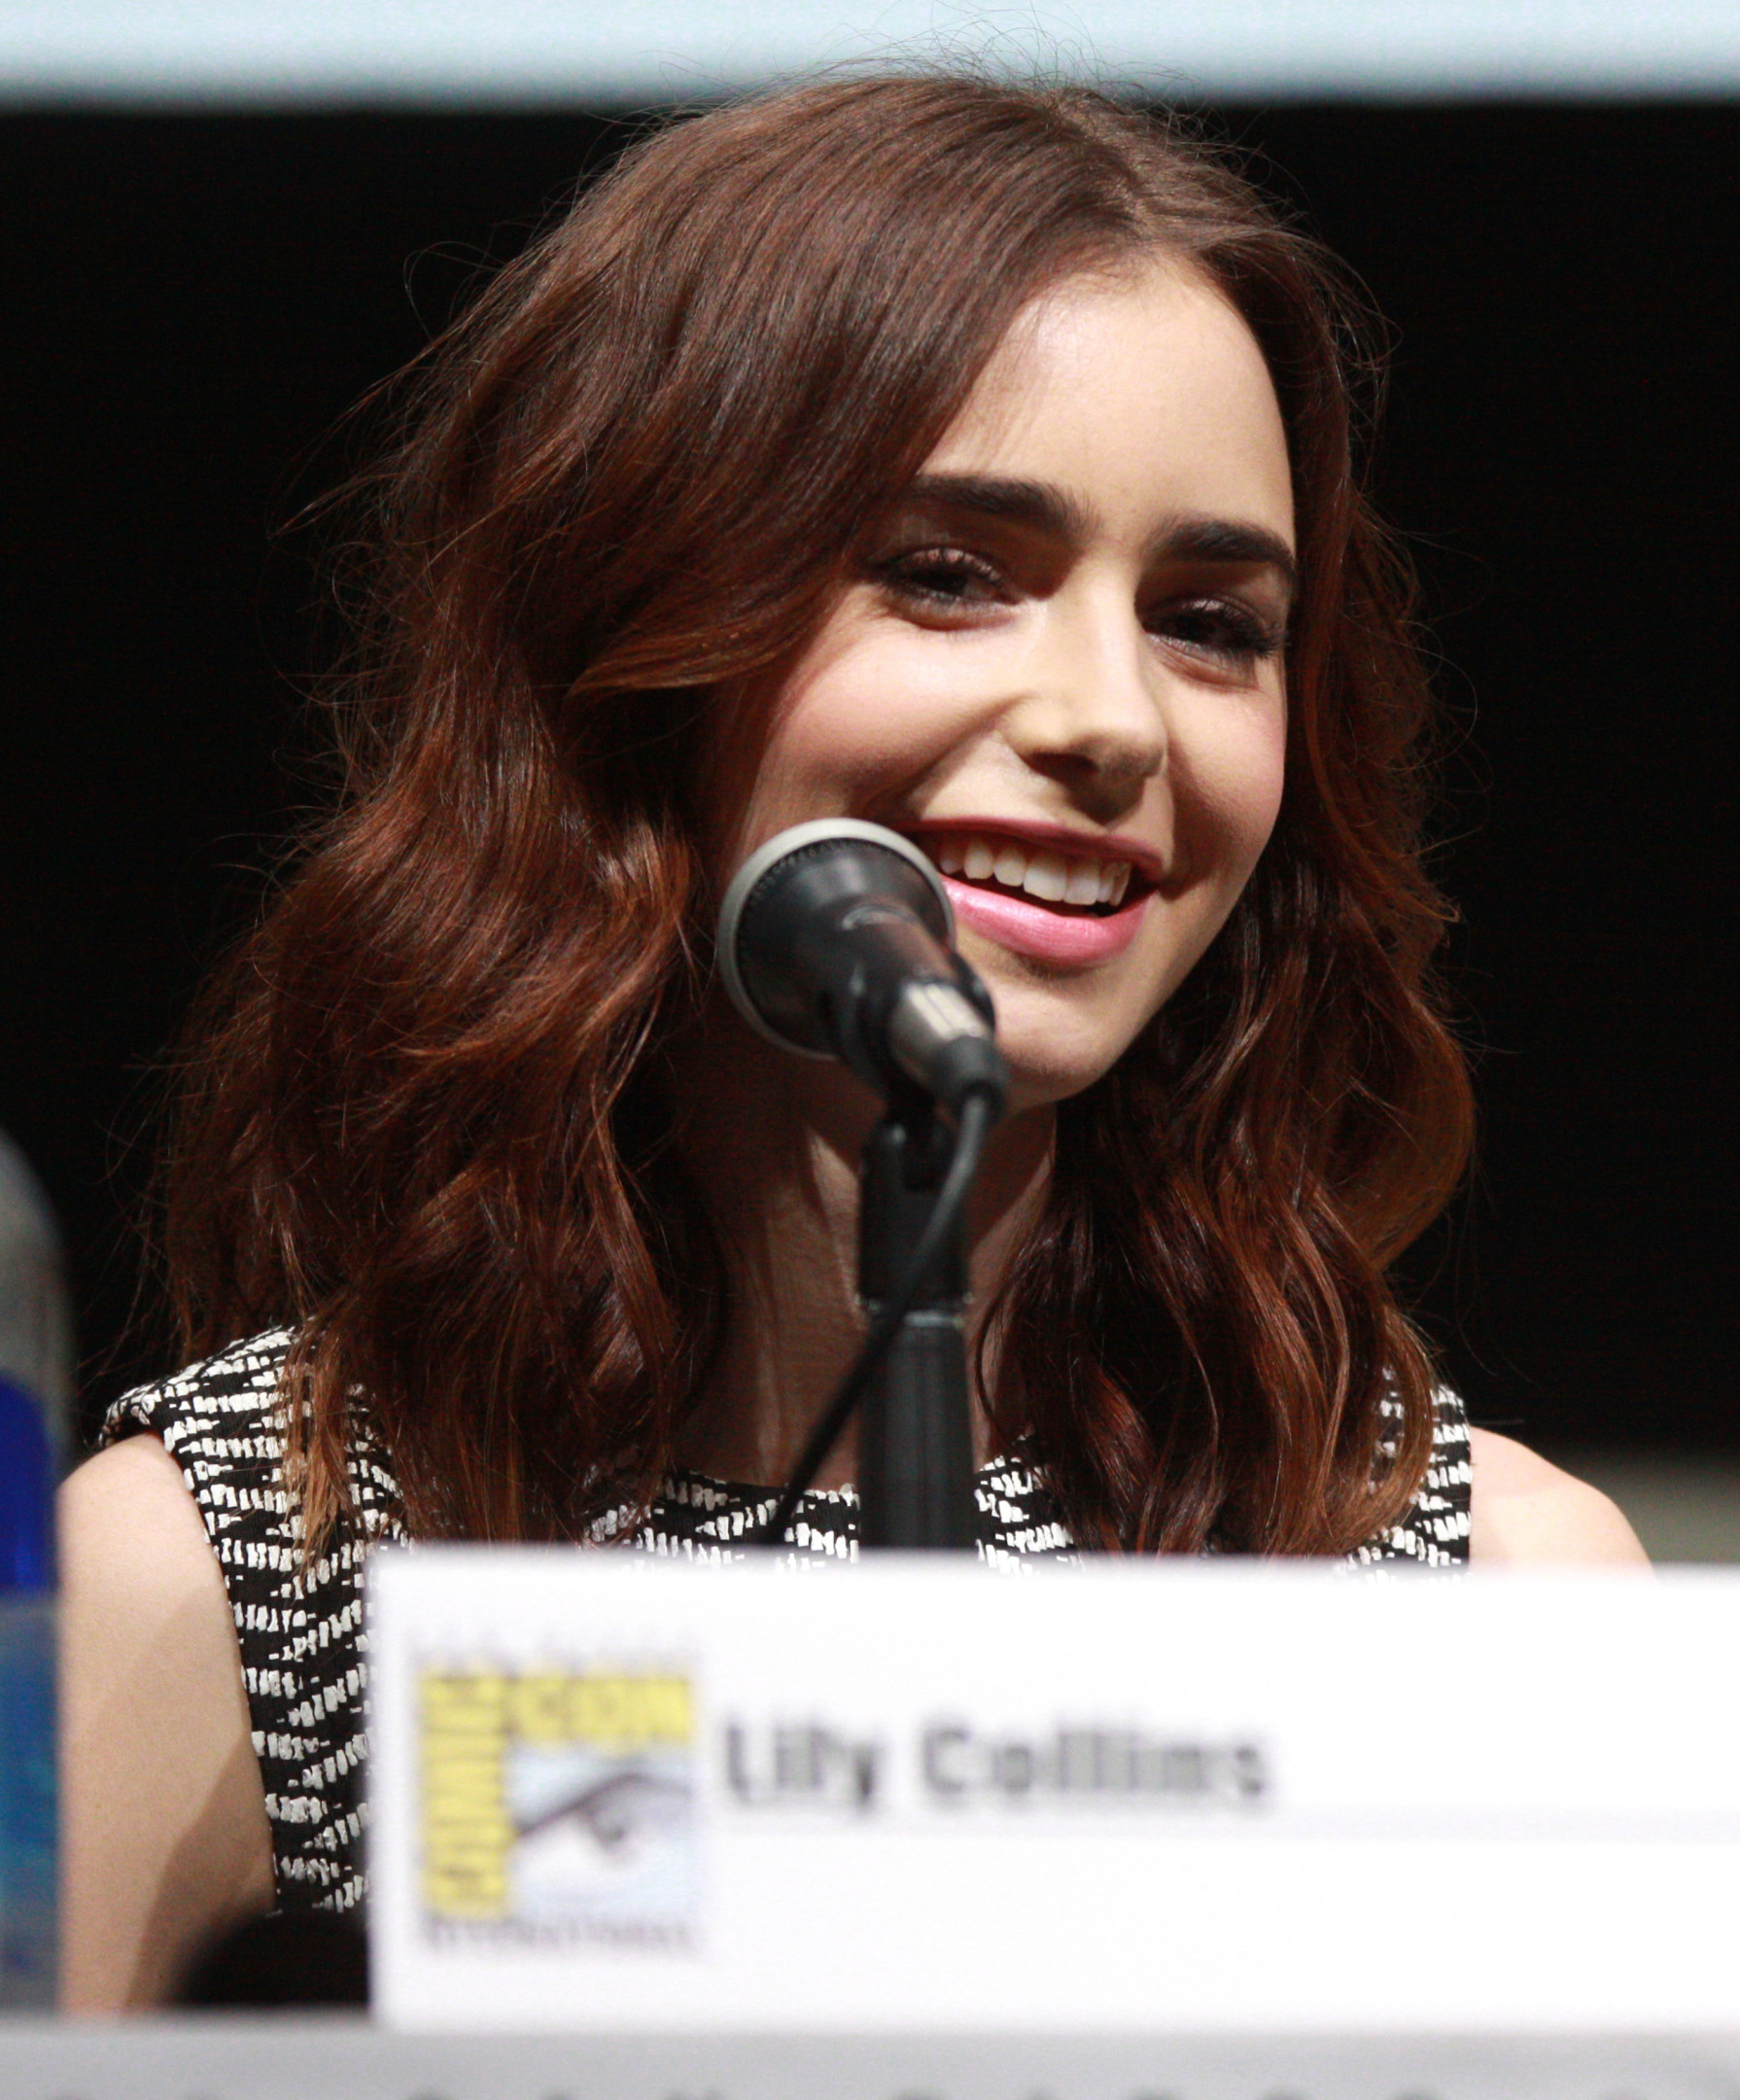 Lily_Collins_by_Gage_Skidmore.jpeg